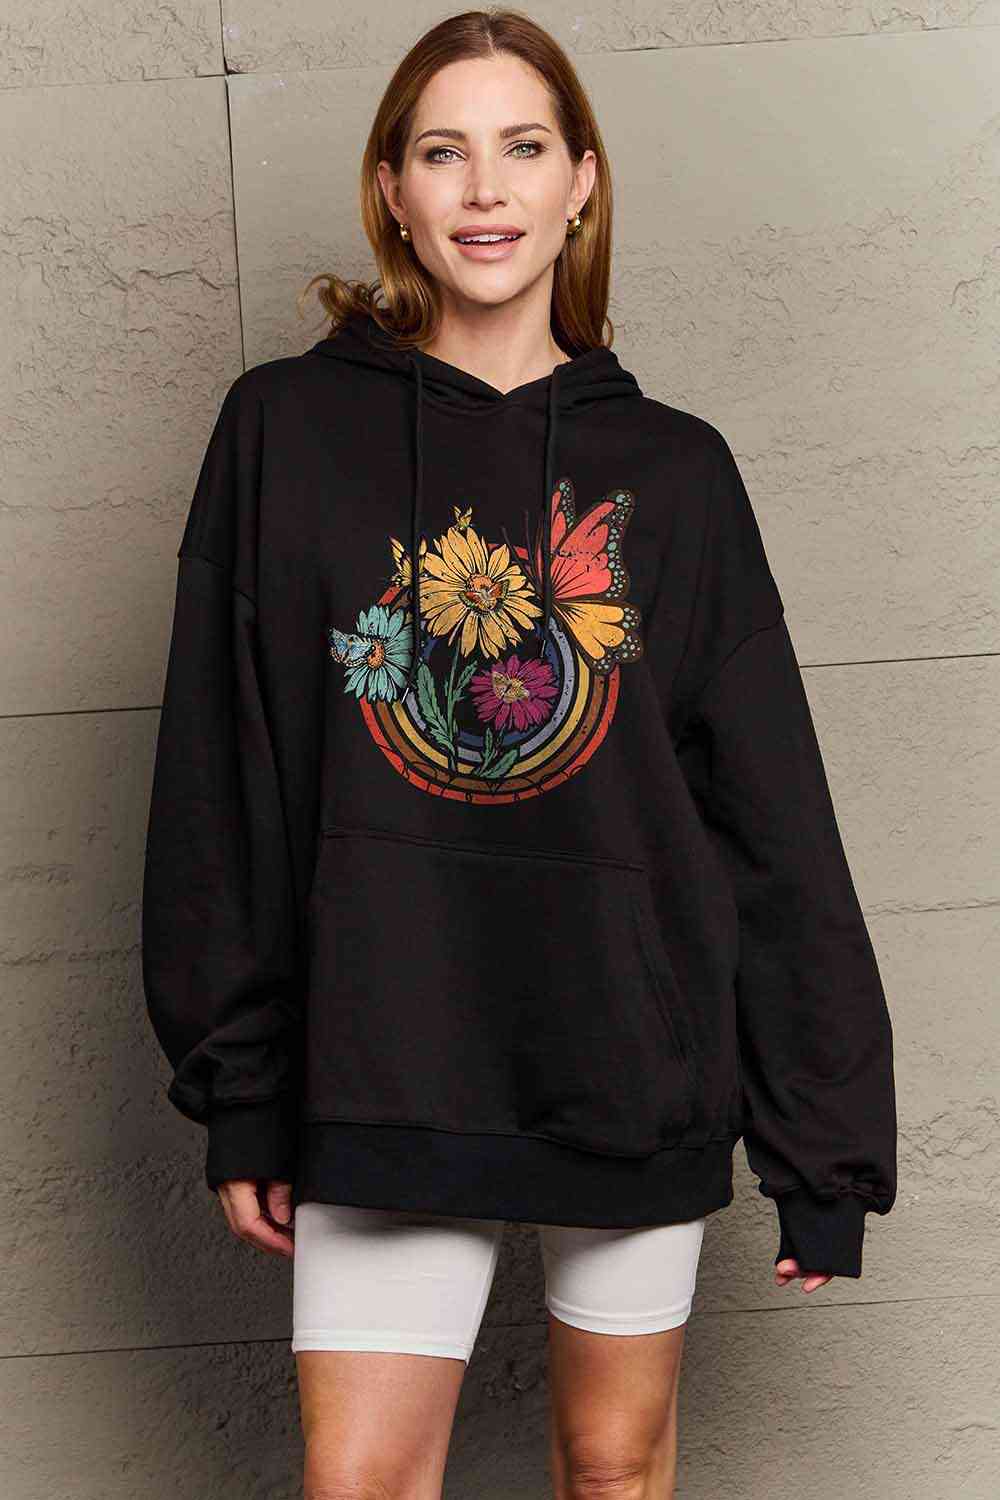 Simply Love Simply Love Full Size Butterfly and Flower Graphic Hoodie